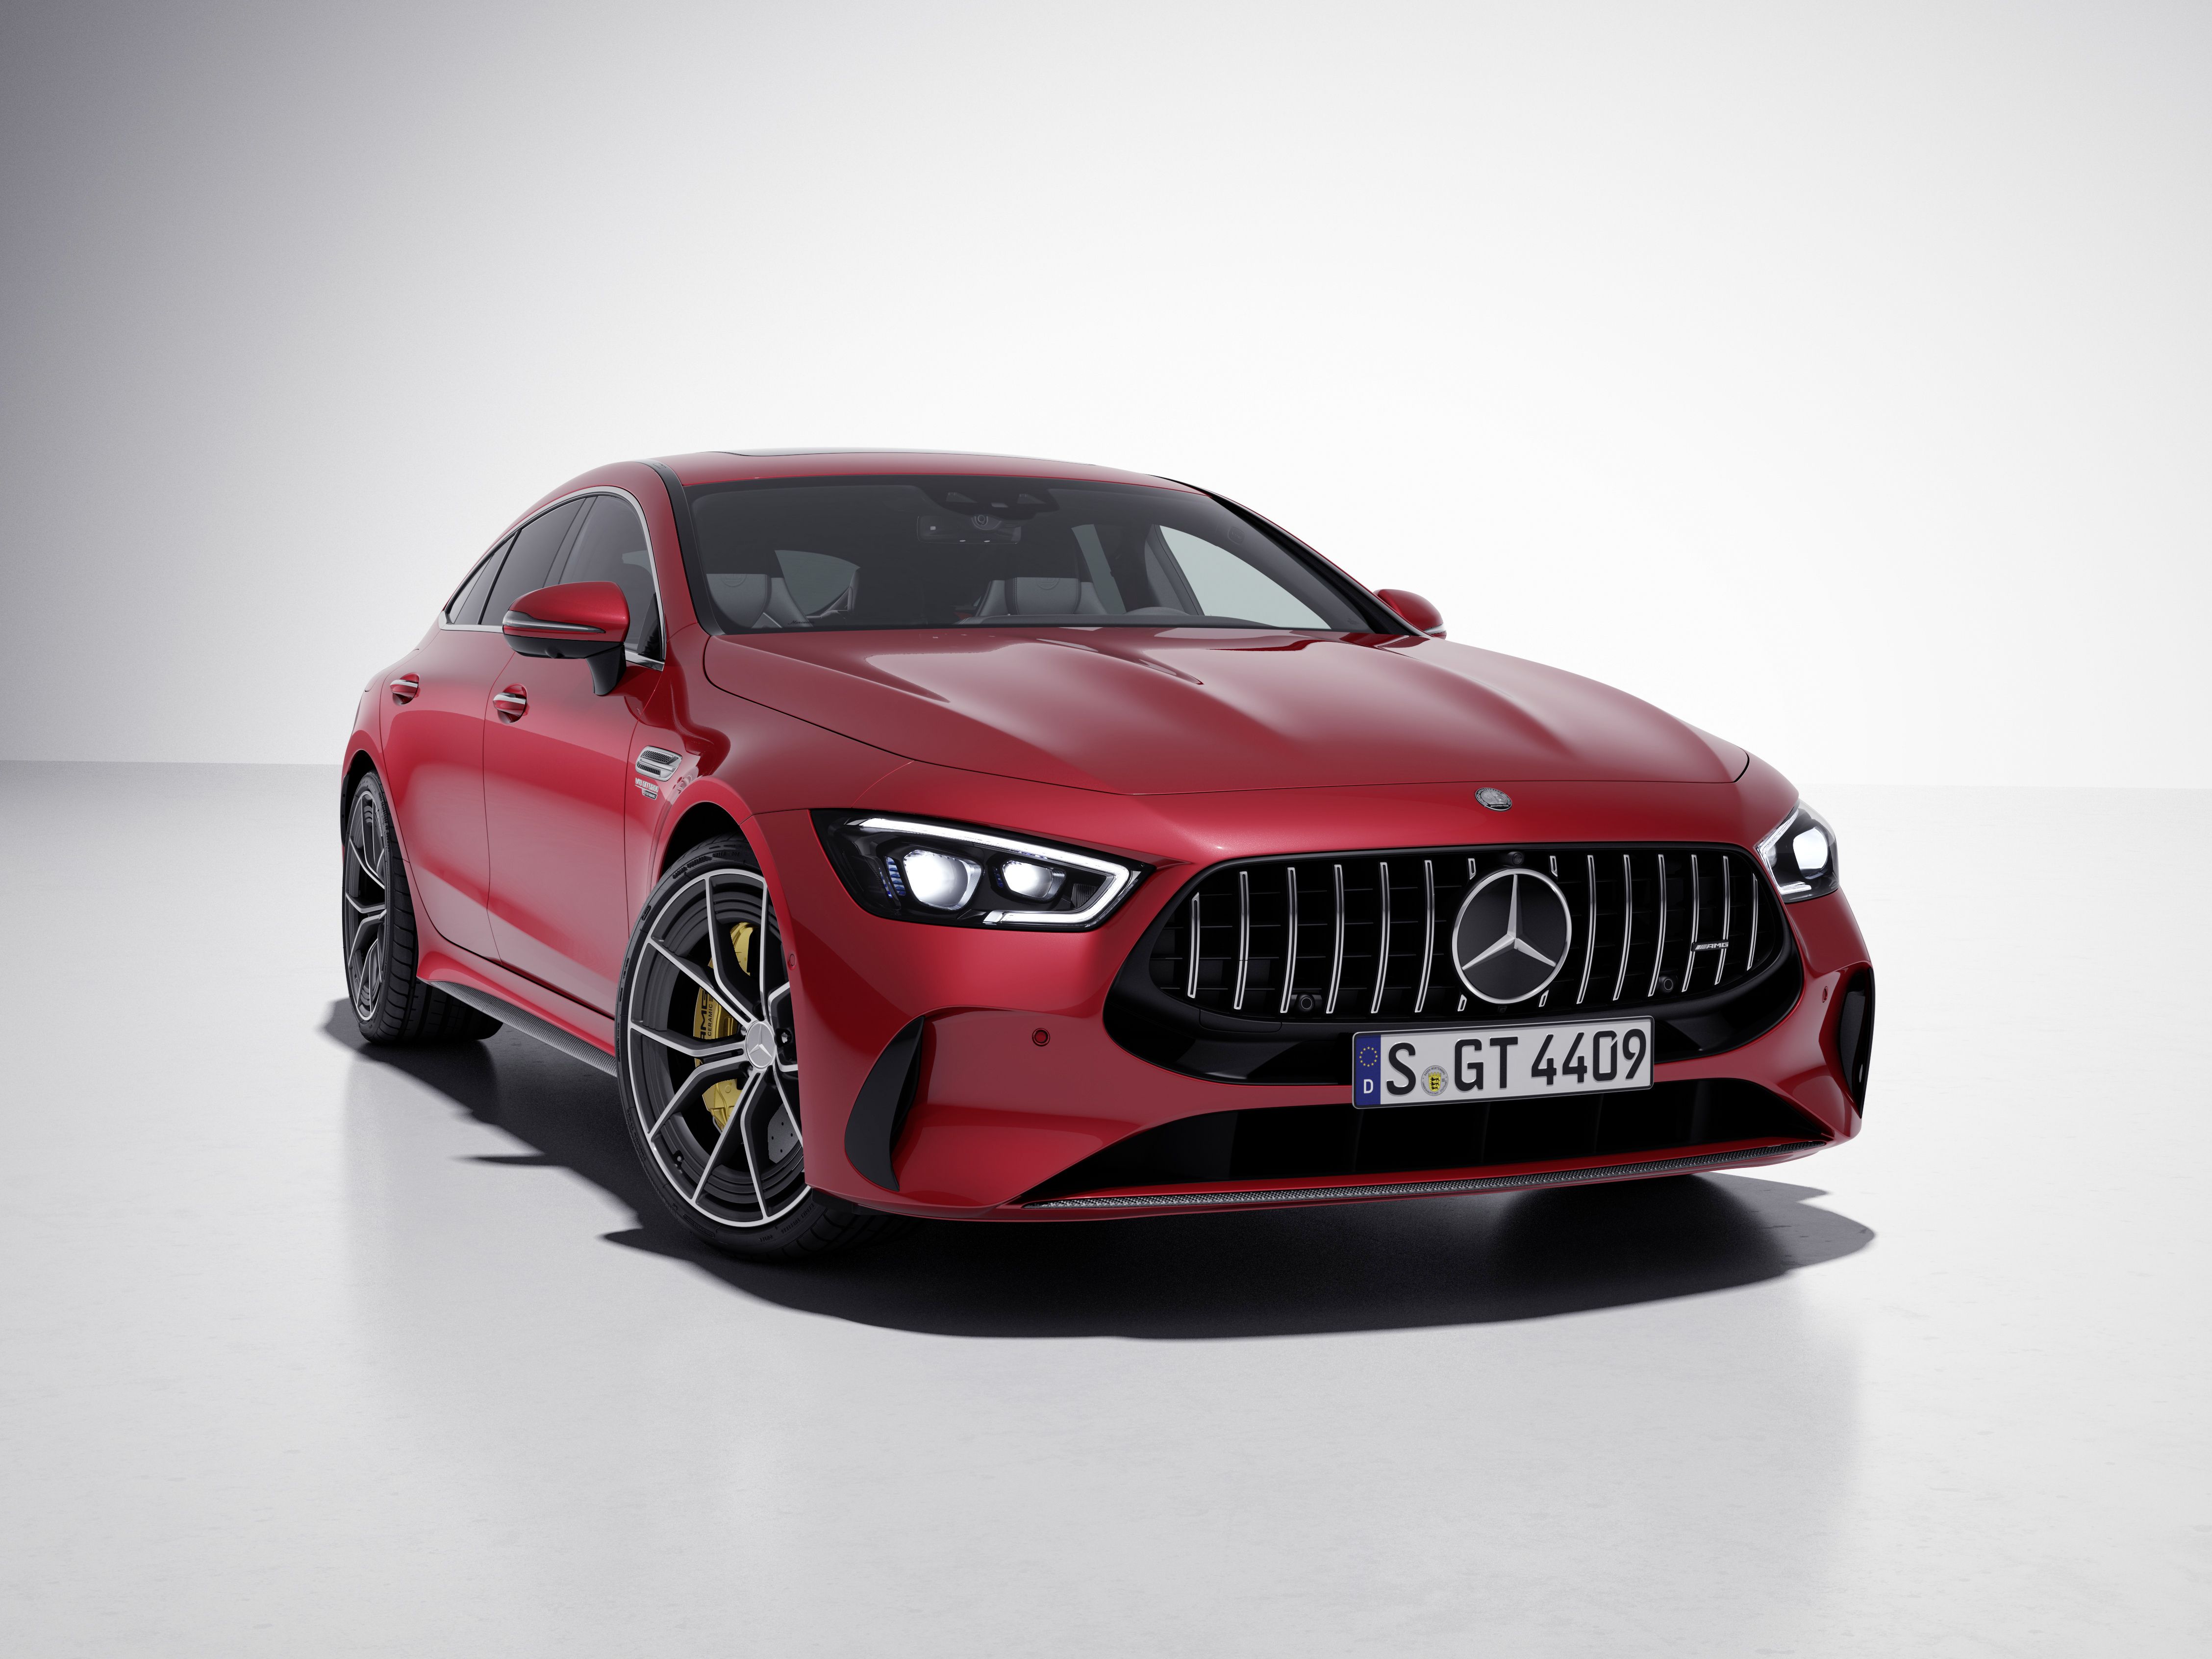 2024 Mercedes-AMG C63 S E Performance Debuts With Hybrid Turbo Four